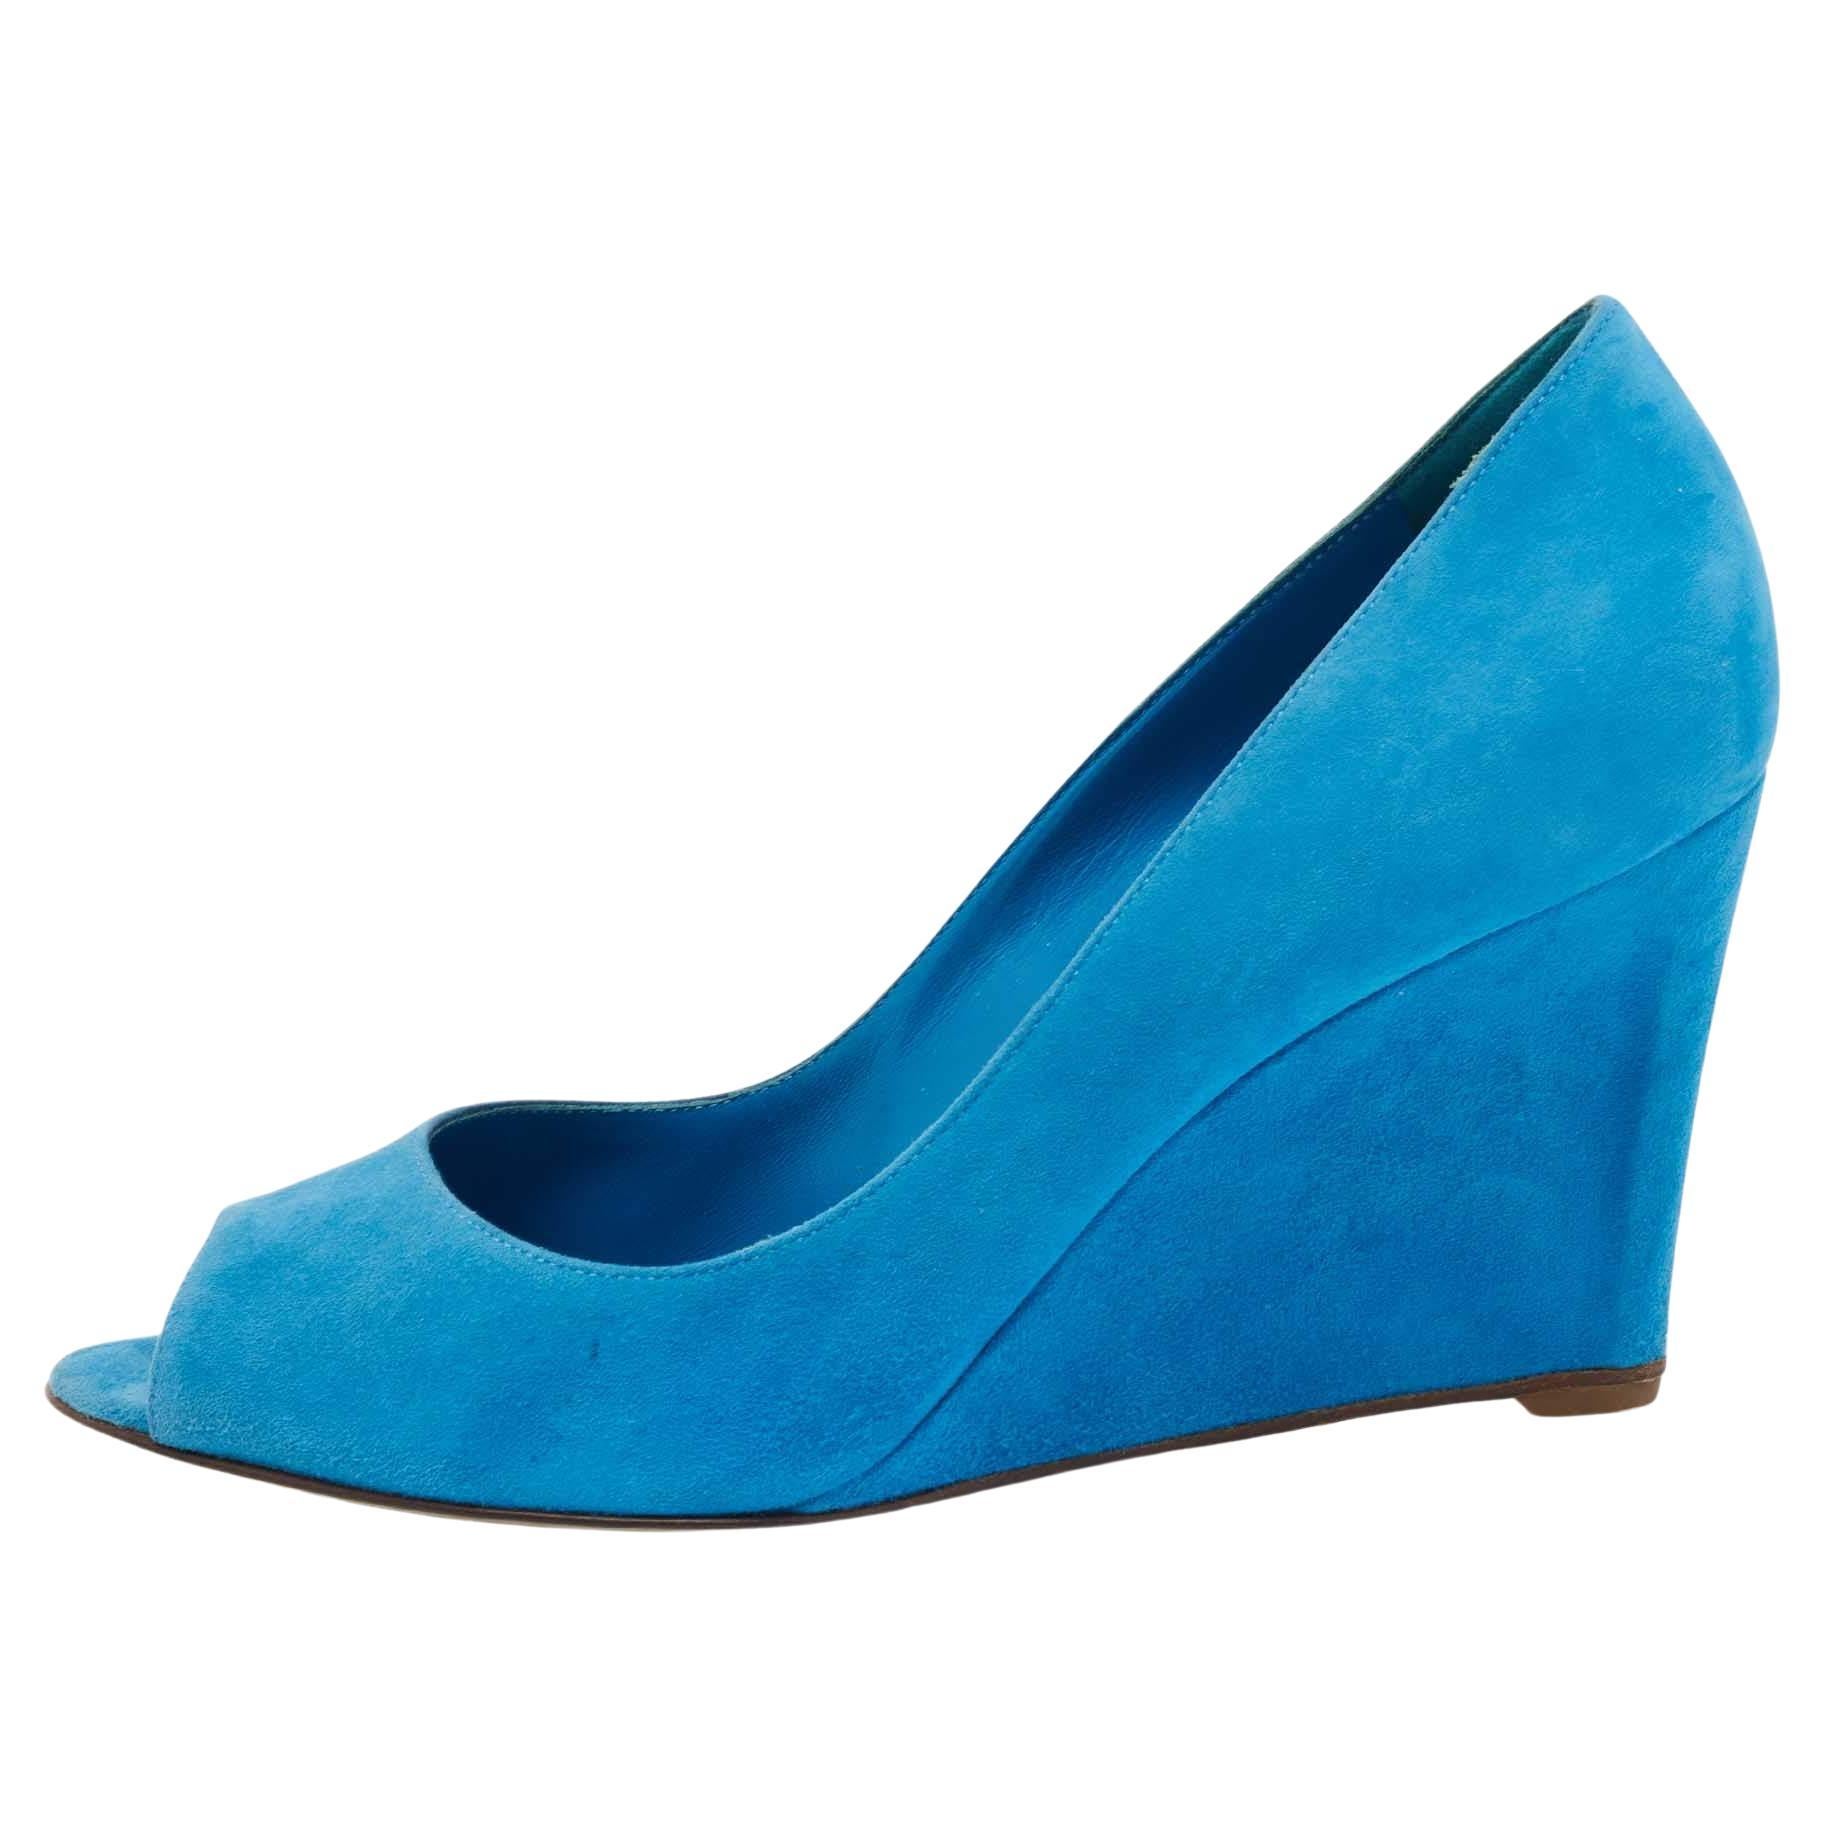 Sergio Rossi Blue Suede Peep Toe Wedge Pumps Size 40.5 For Sale